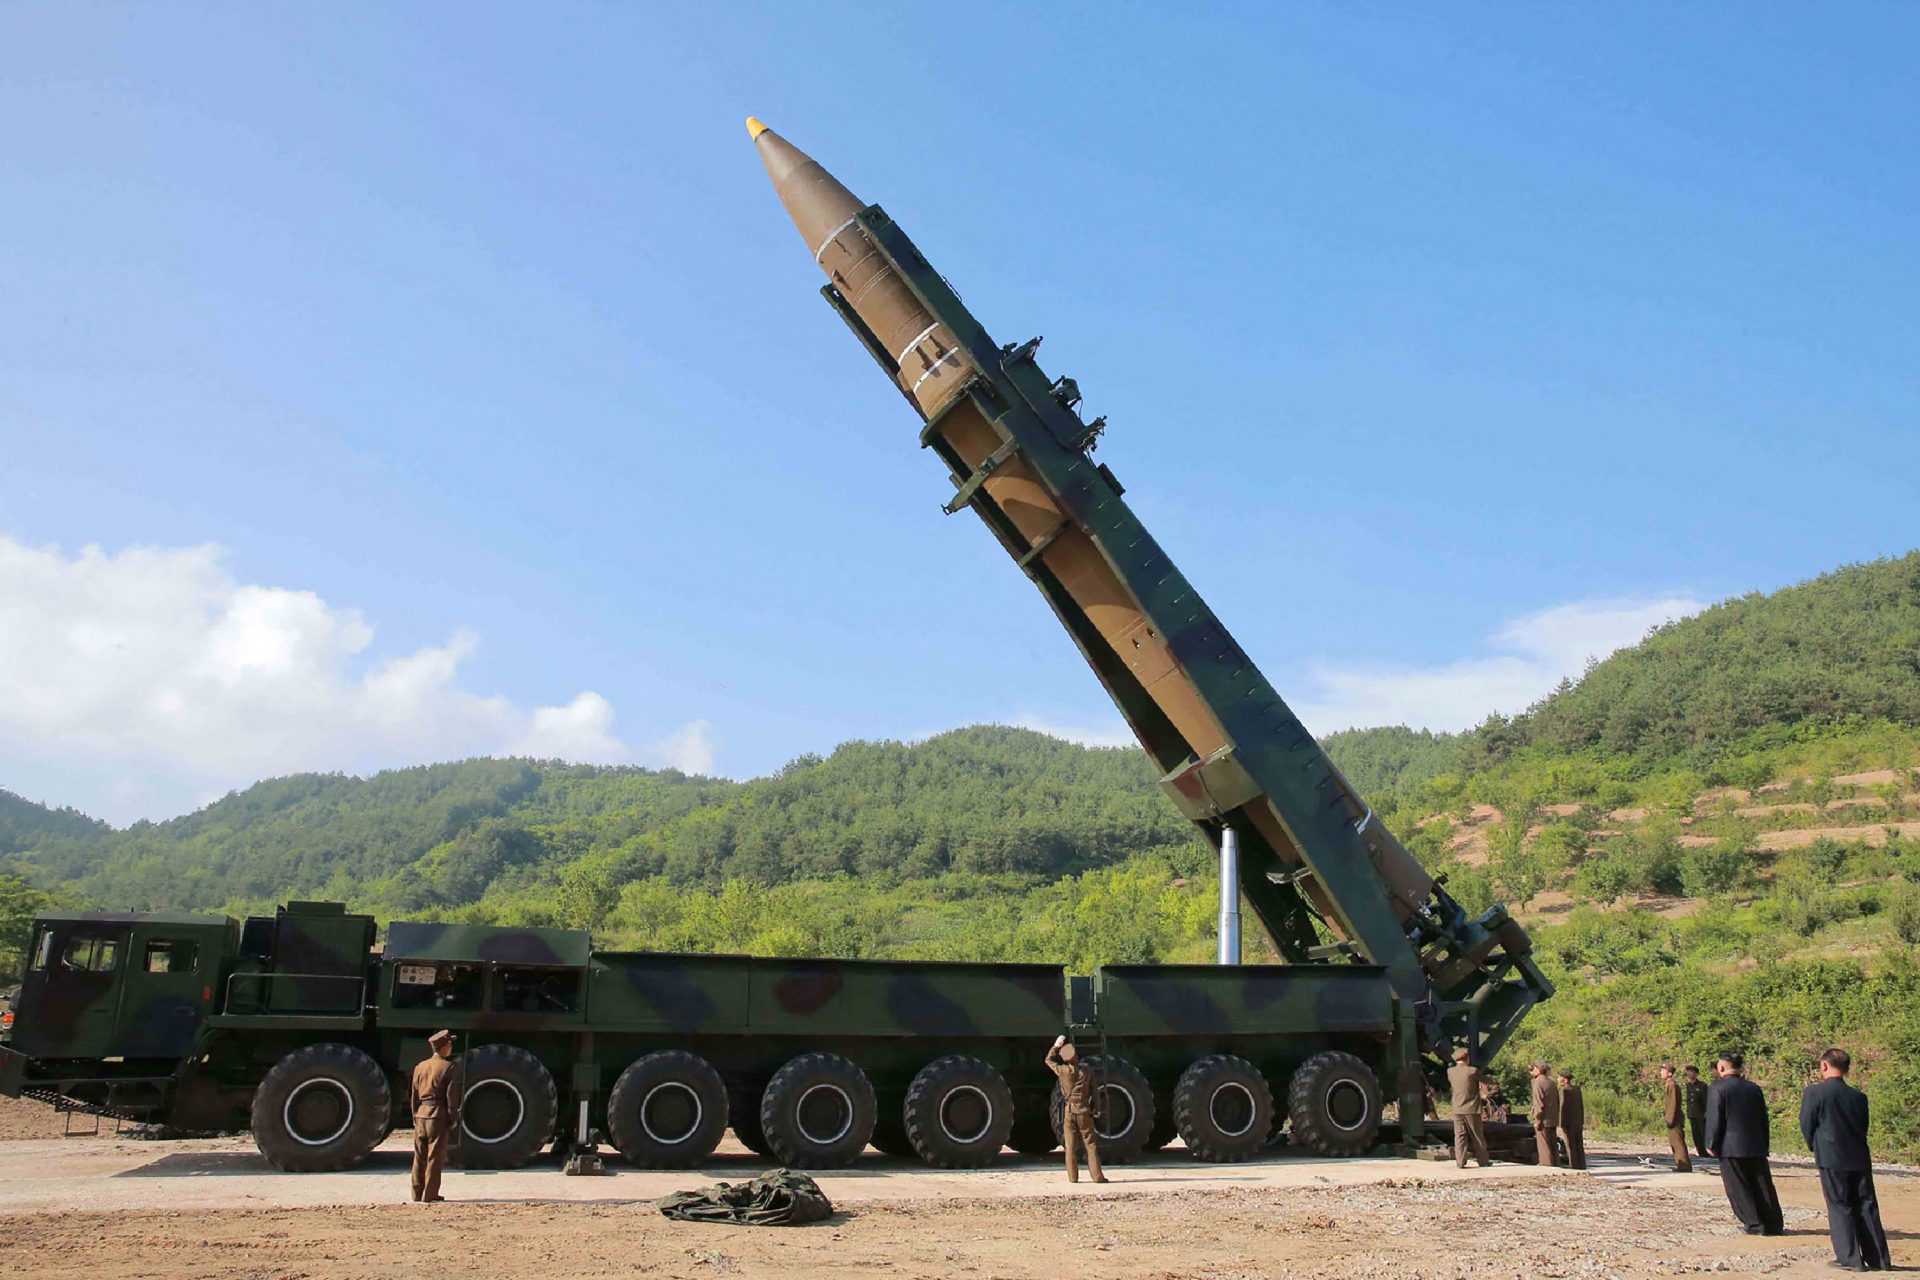 <p><span>First, it showed that North Korea has been able to manufacture advanced weapons and integrate modern components into those weapons as recently as 2023 despite many long-standing United Nations Security Council sanctions. </span></p>